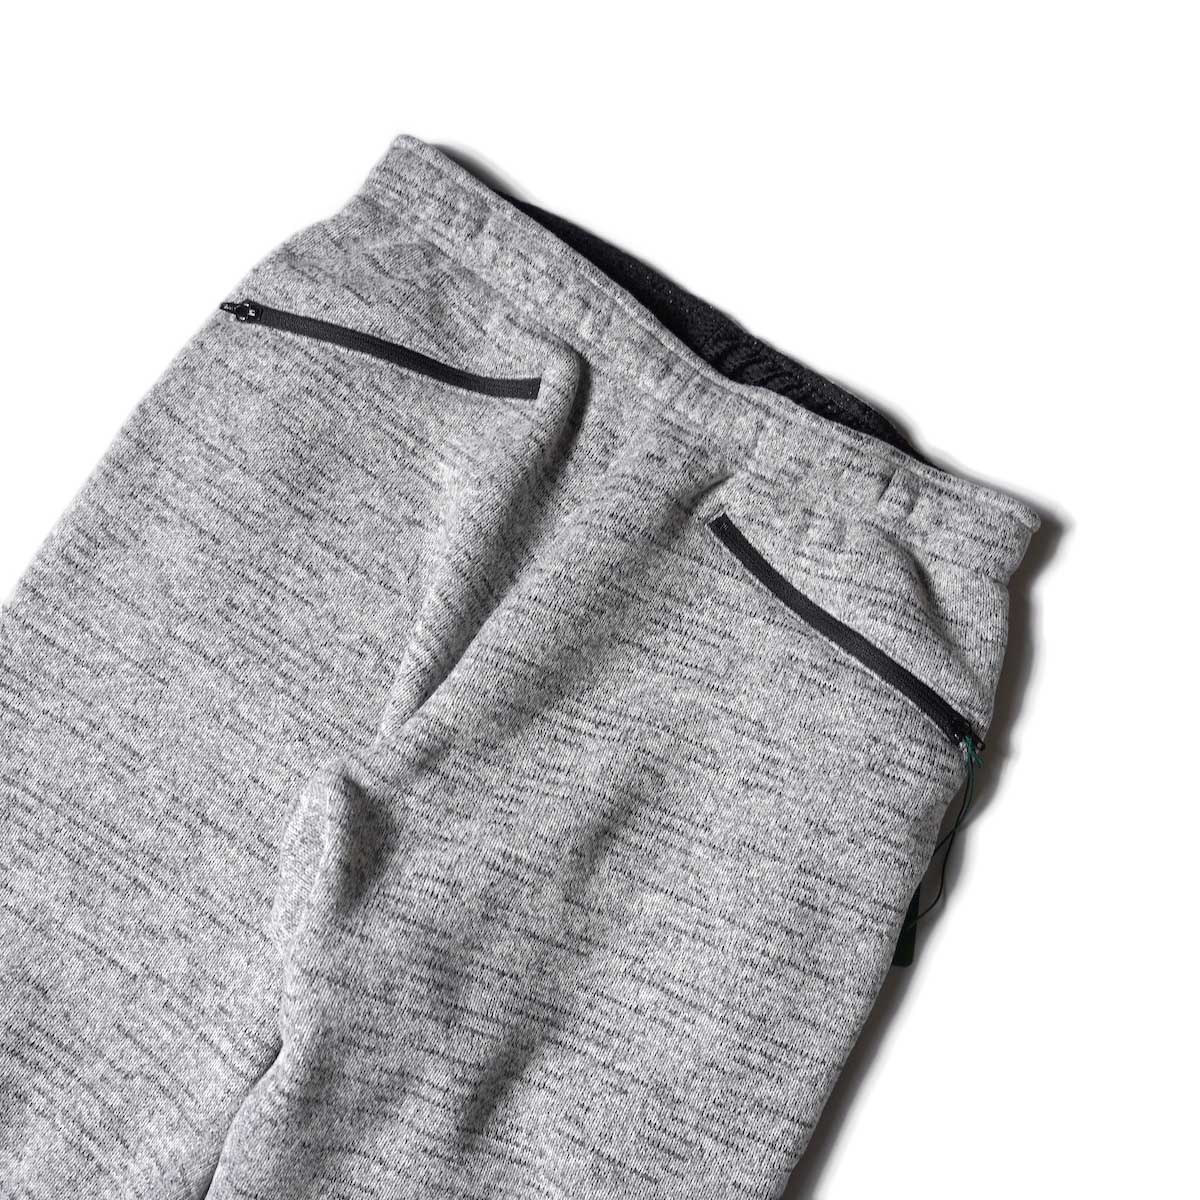 South2 West8 / 2P Cycle Pant - POLARTEC Fleece Lined Jersey (Grey)ウエスト